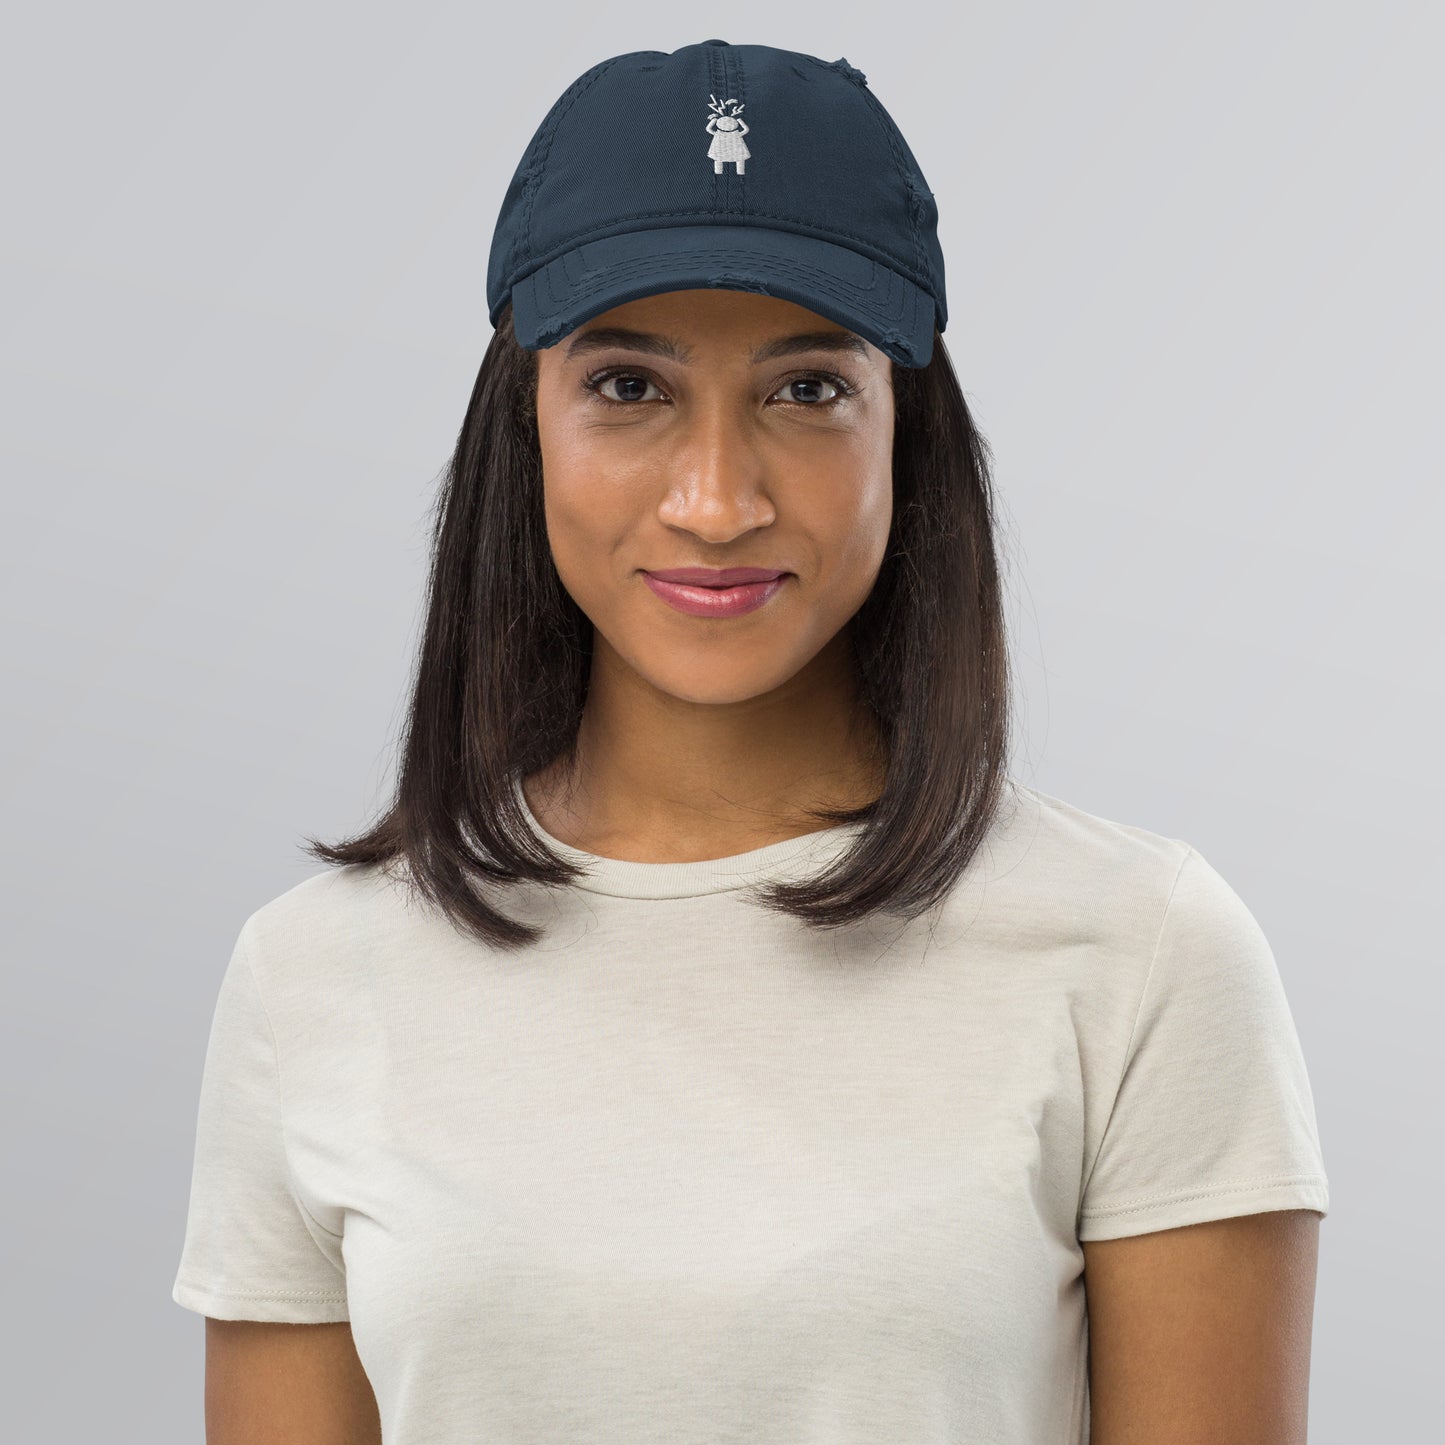 Screaming Woman Embroidered Distressed Cap